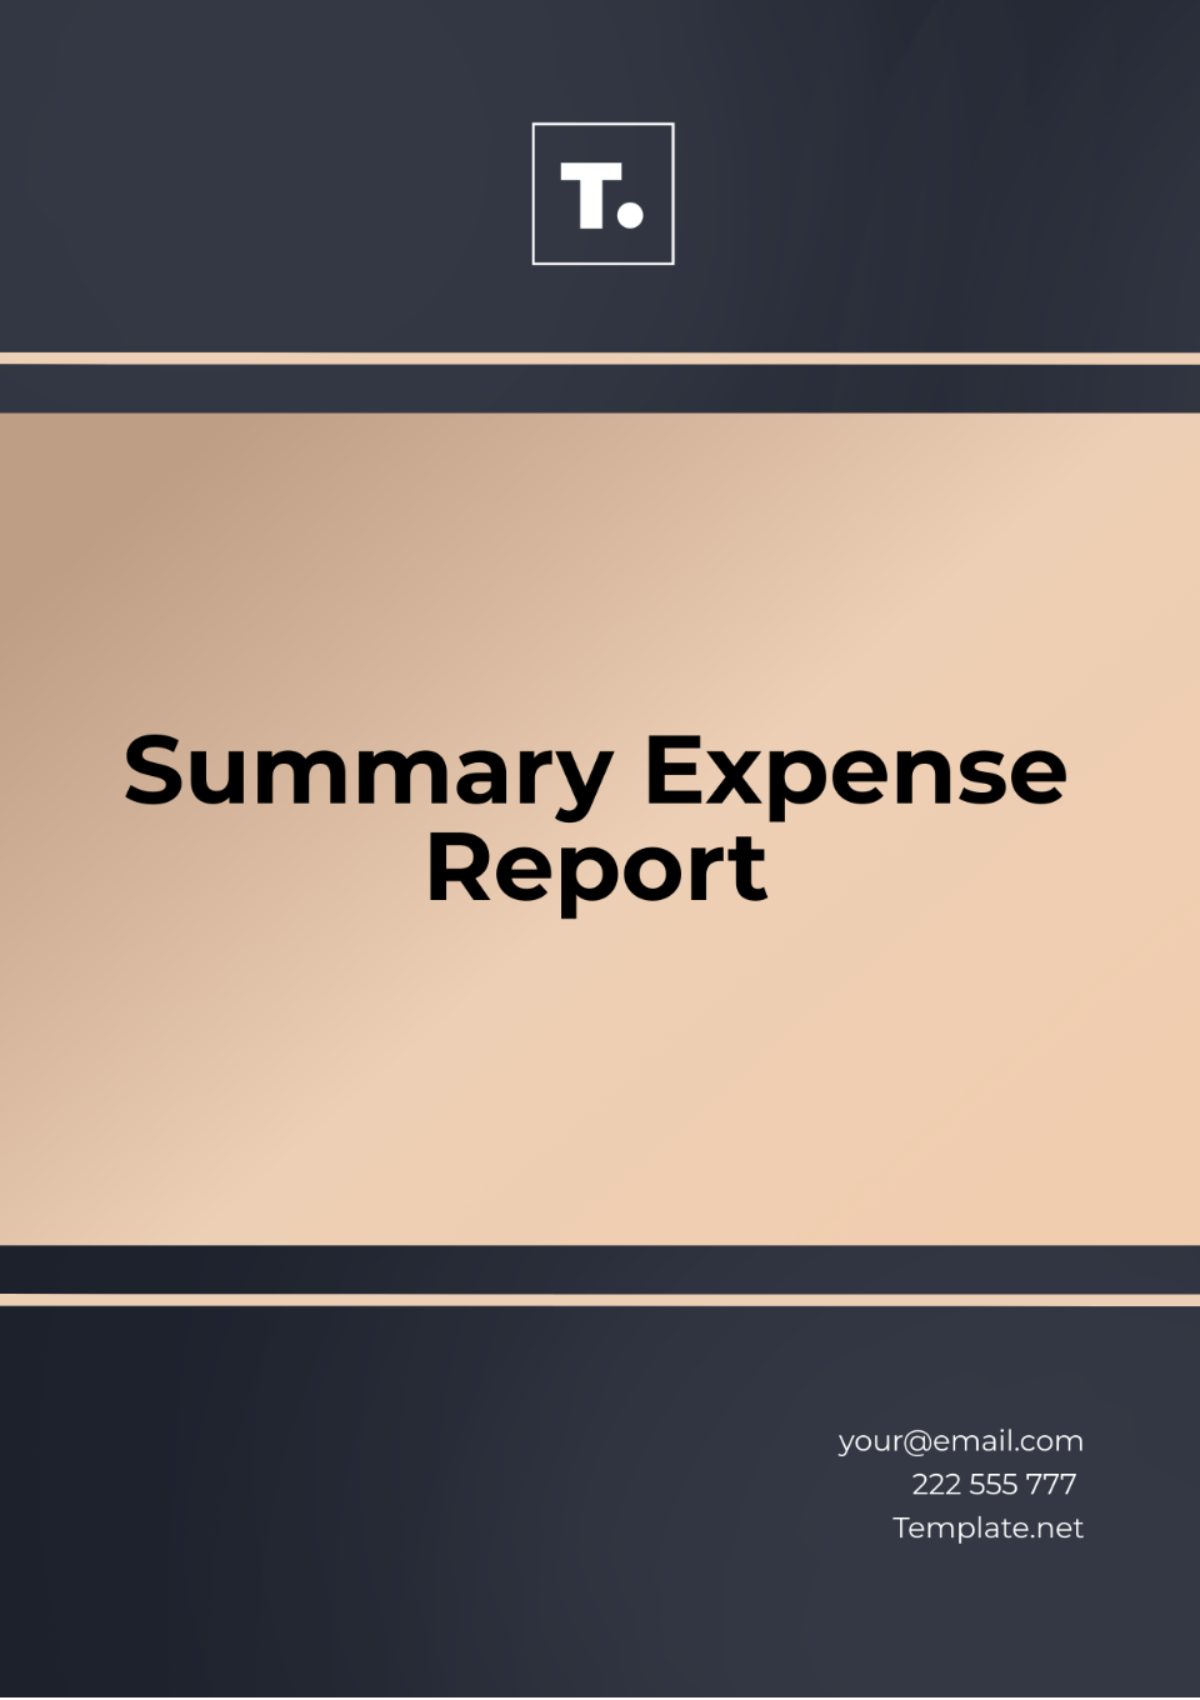 Summary Expense Report Template